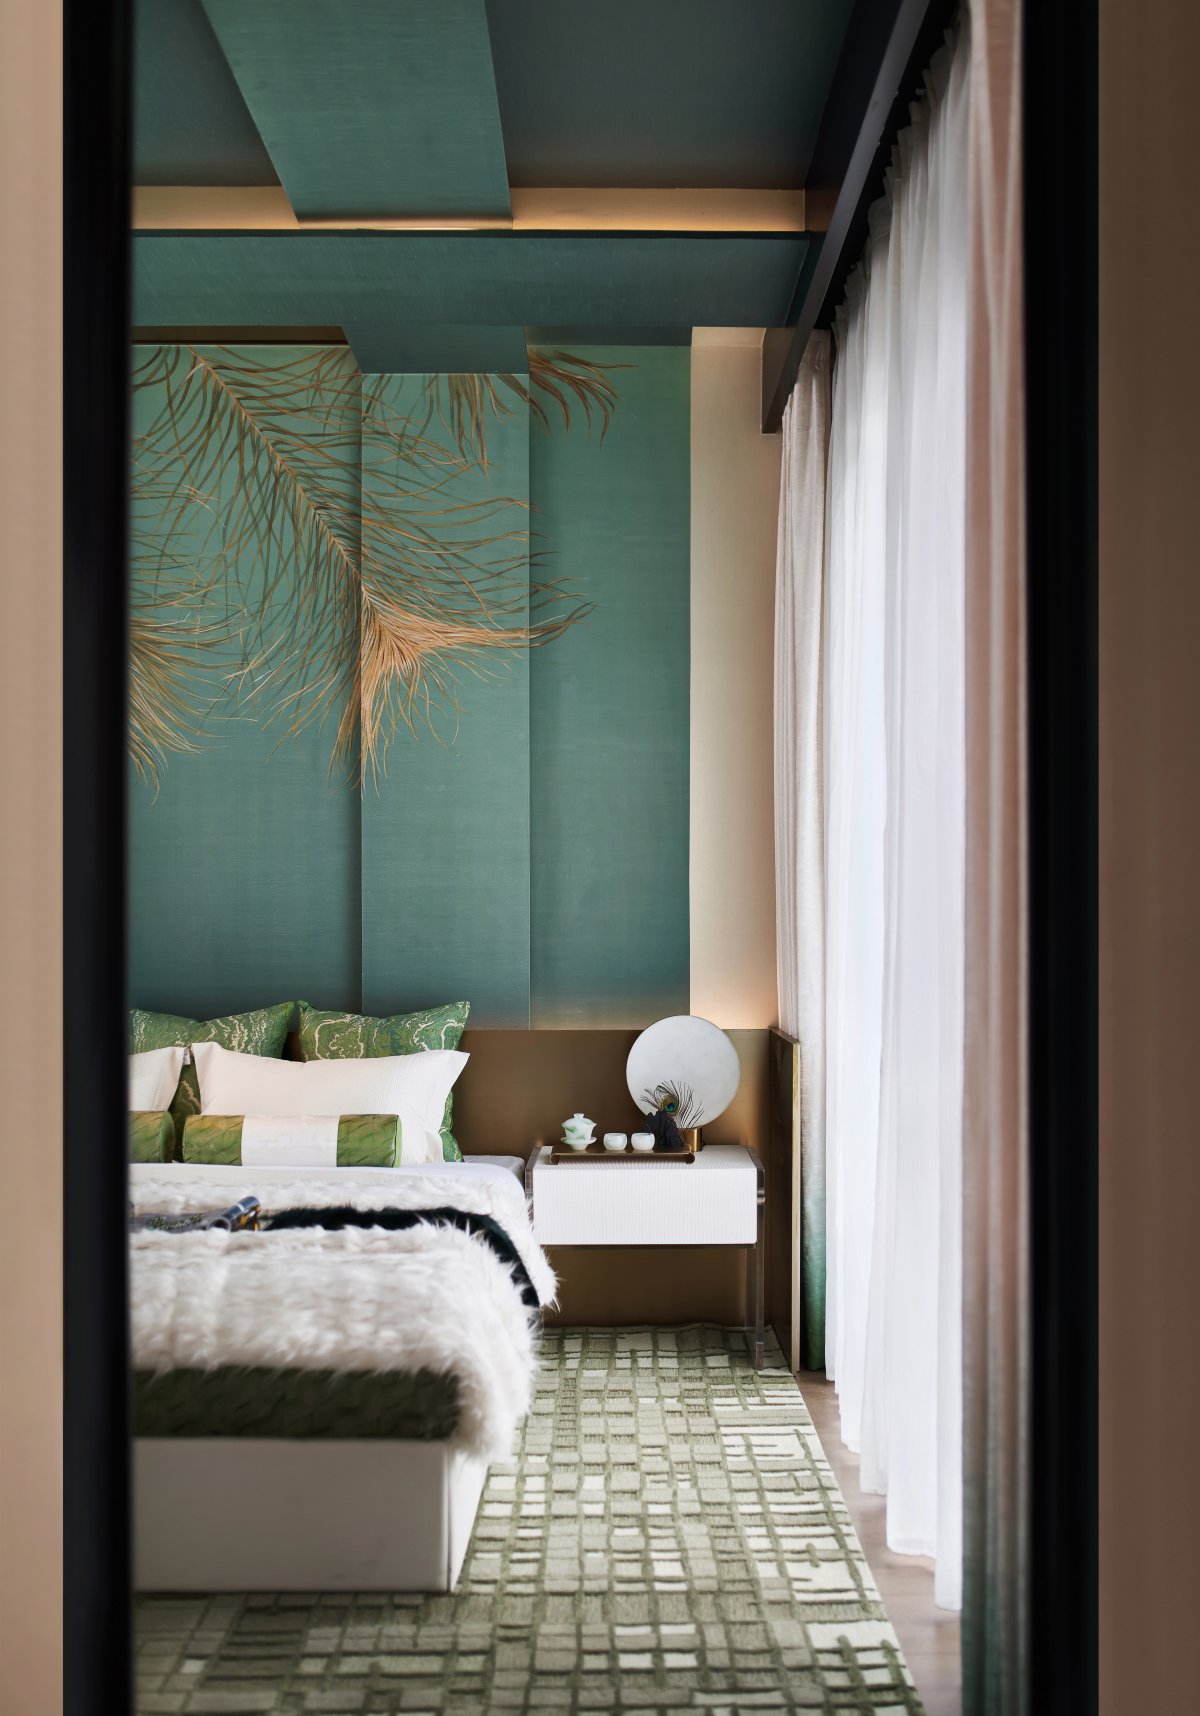 An electrifying moon story told by GBD studio in the luxury villa project - Main Bedroom